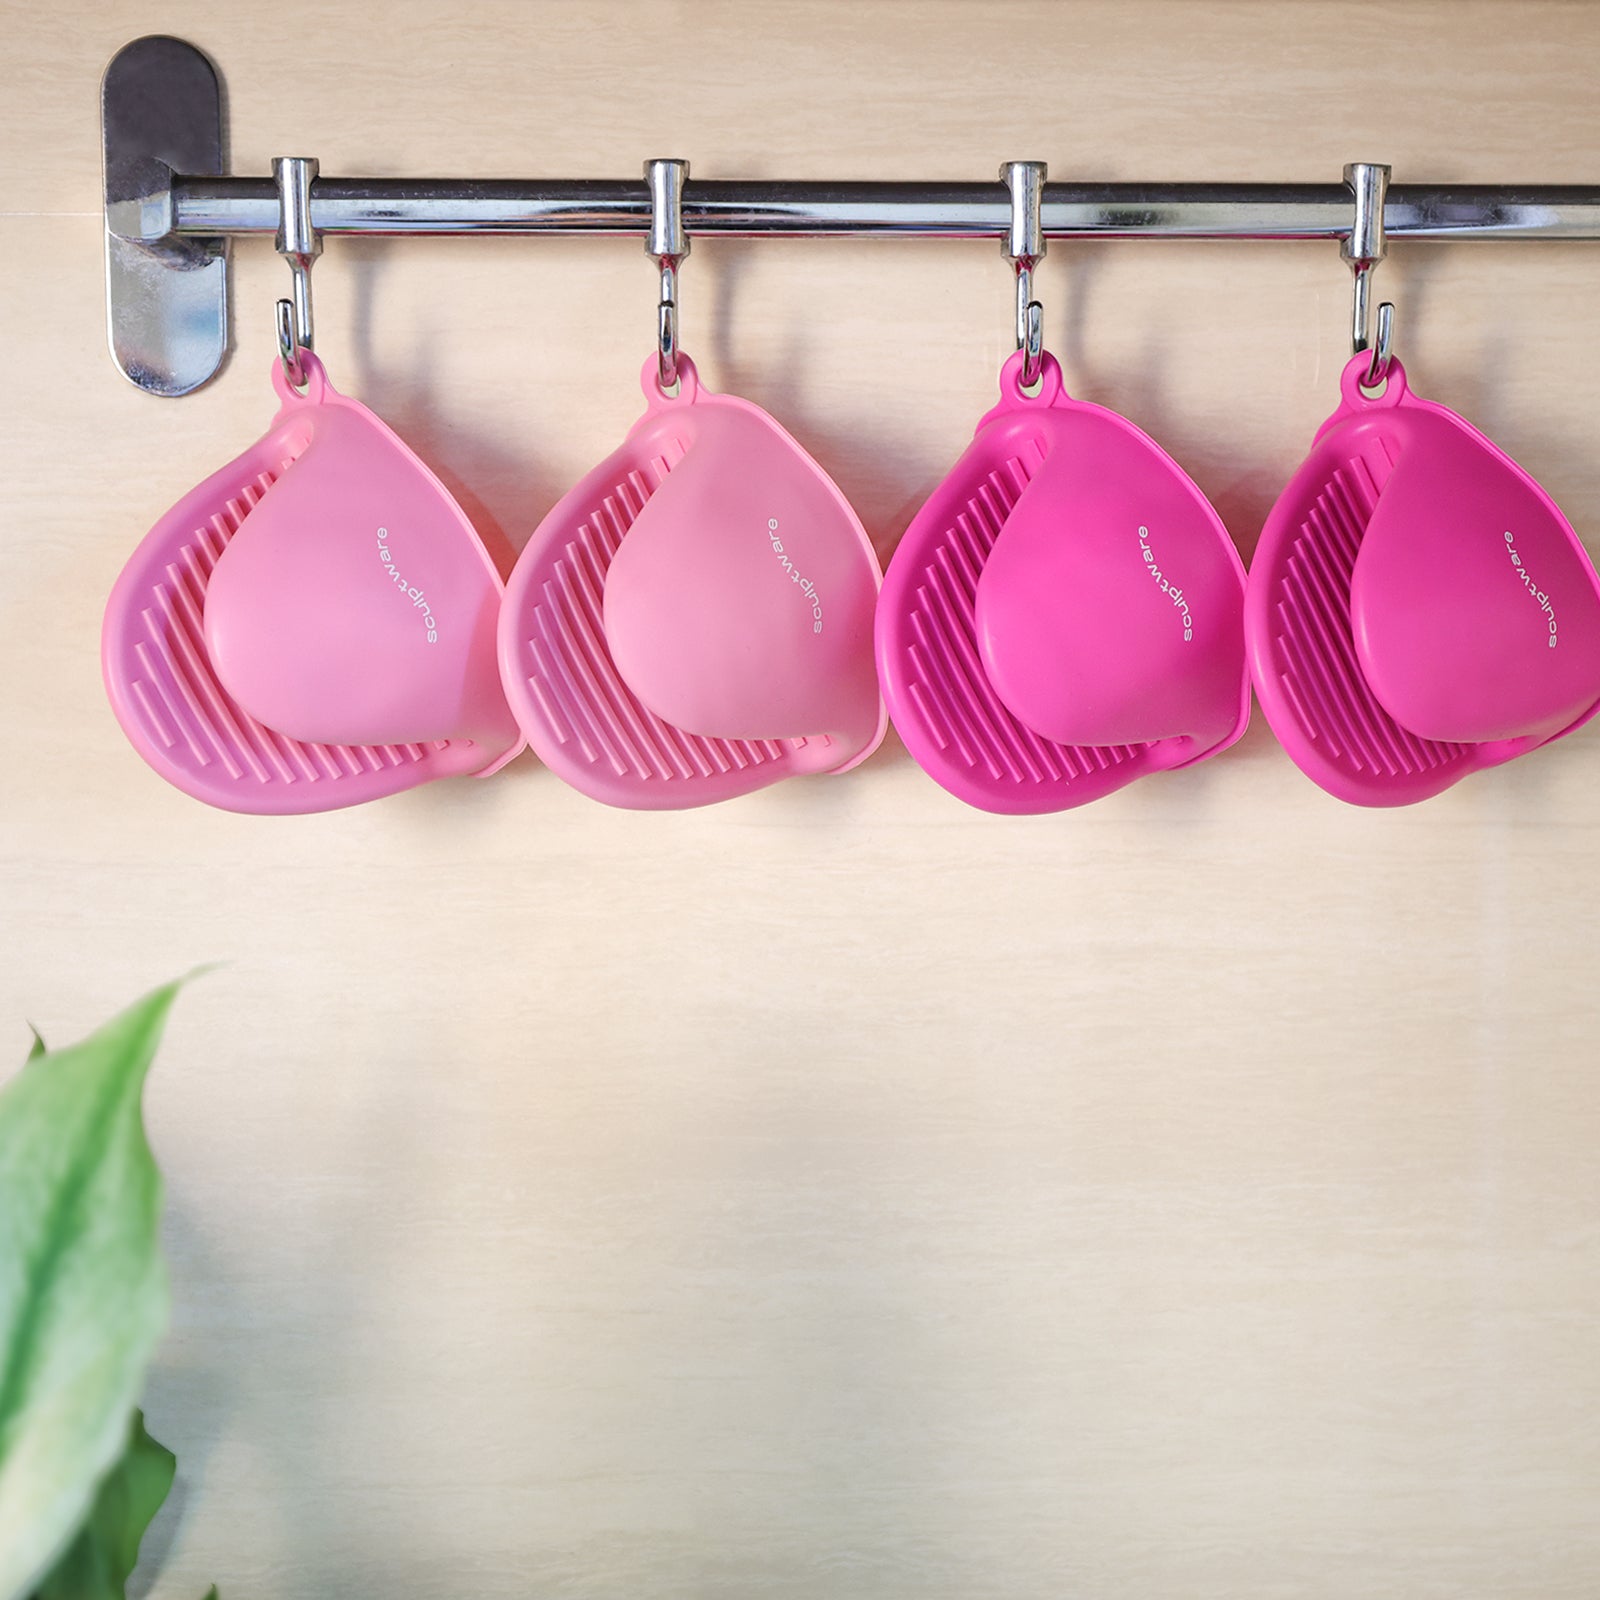 Silicone Pot Holder / Silicone Oven Mitts - SK Collection